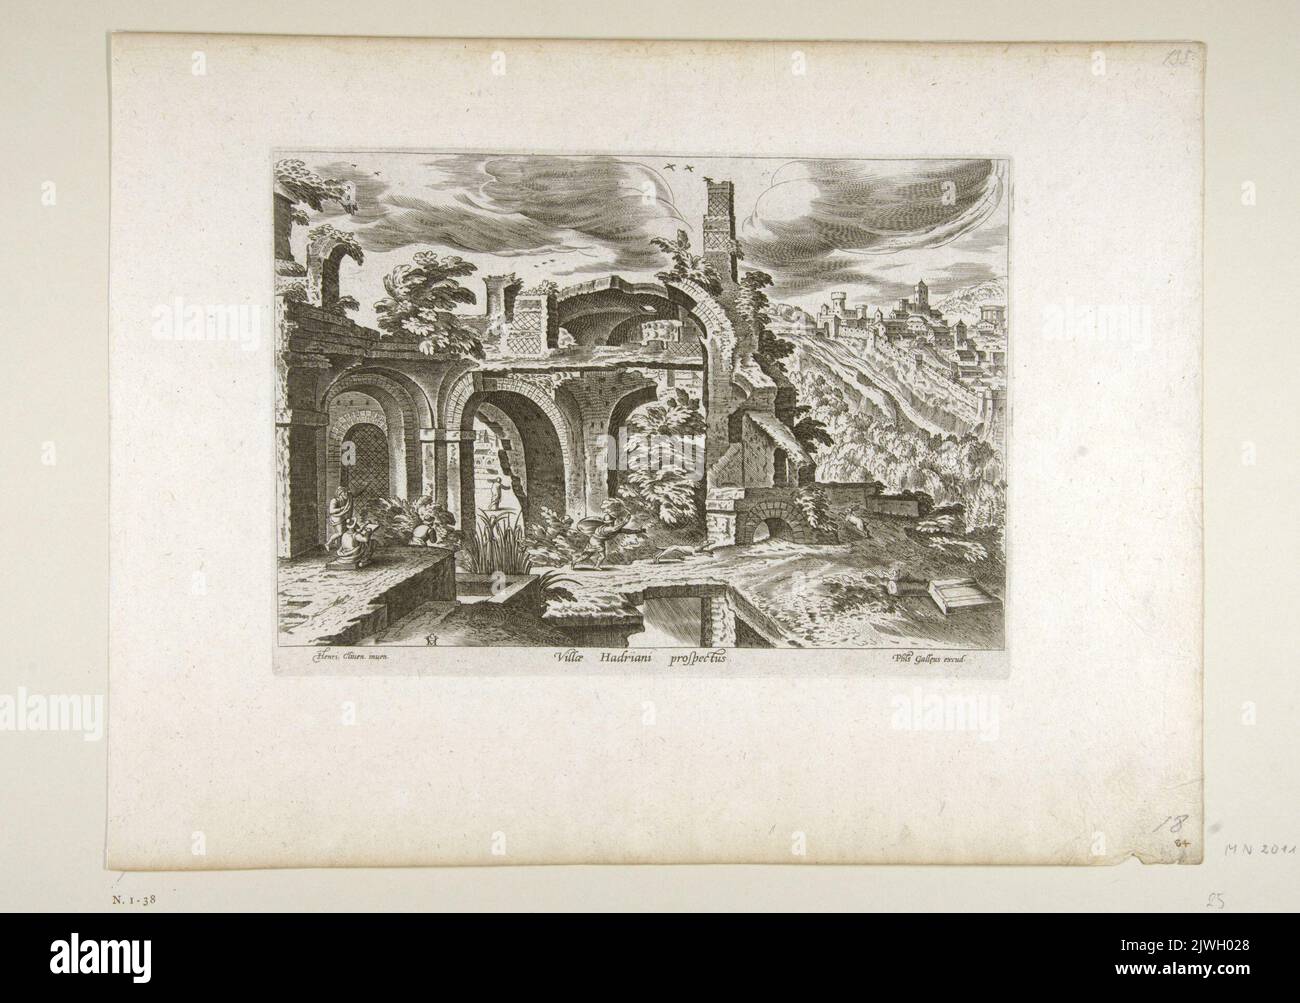 Landscape with ruins of Hadrian’s villa; in the foreground, on the left - the sitting drawer. `Villae Hadriani prospectus`.. Galle, Theodor (1571-1633), graphic artist, Galle, Philips (1537-1612), graphic artist, Cleve, Hendrick van, III (ca 1525-1589), draughtsman, cartoonist Stock Photo